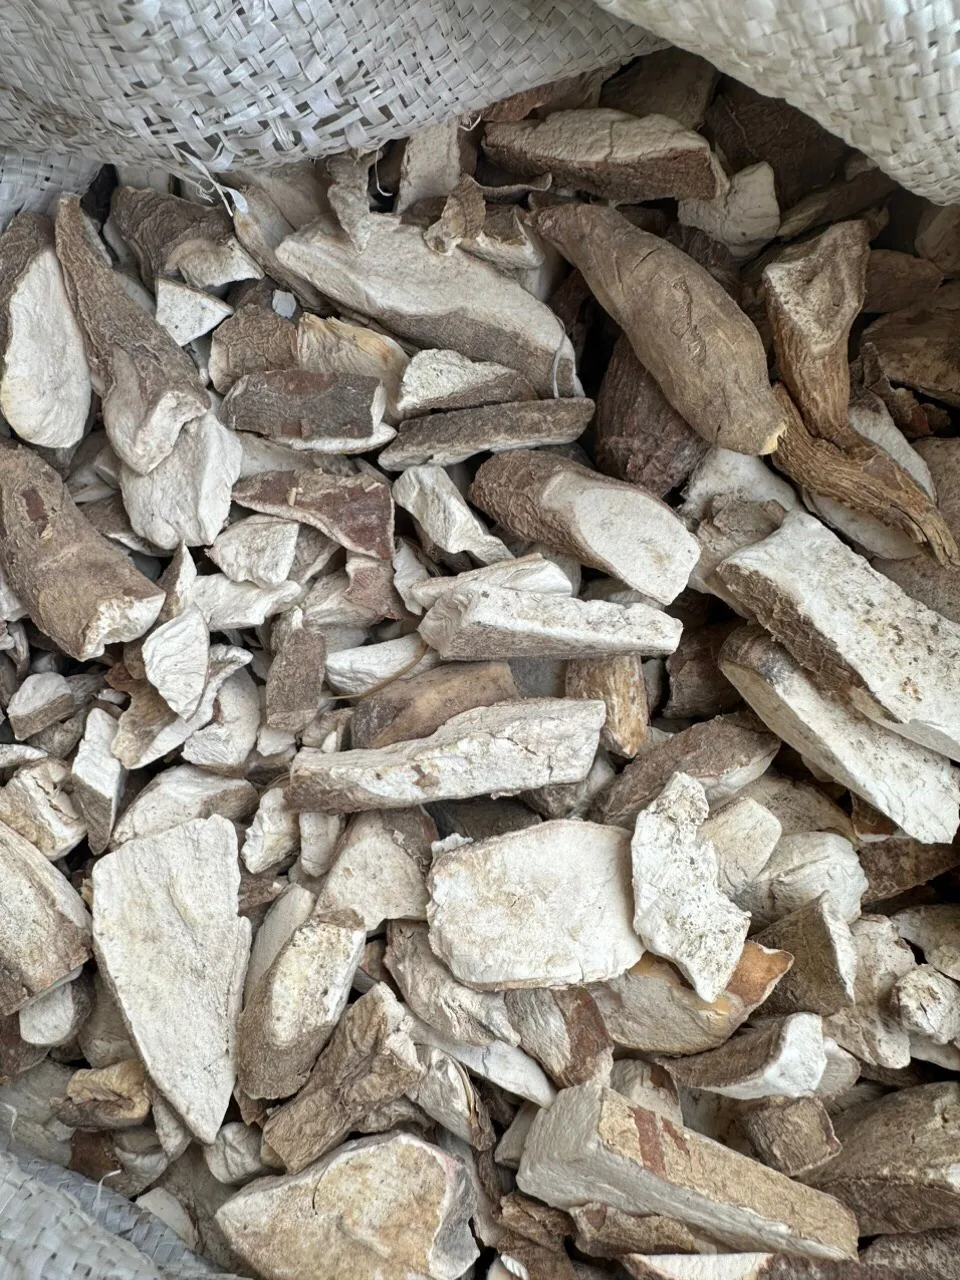 Cassava Tapioca Chips Vietnam High Quality Best Price for Animal Feed Dried Cassava Chips Cheap Sales Sliced Tapioca